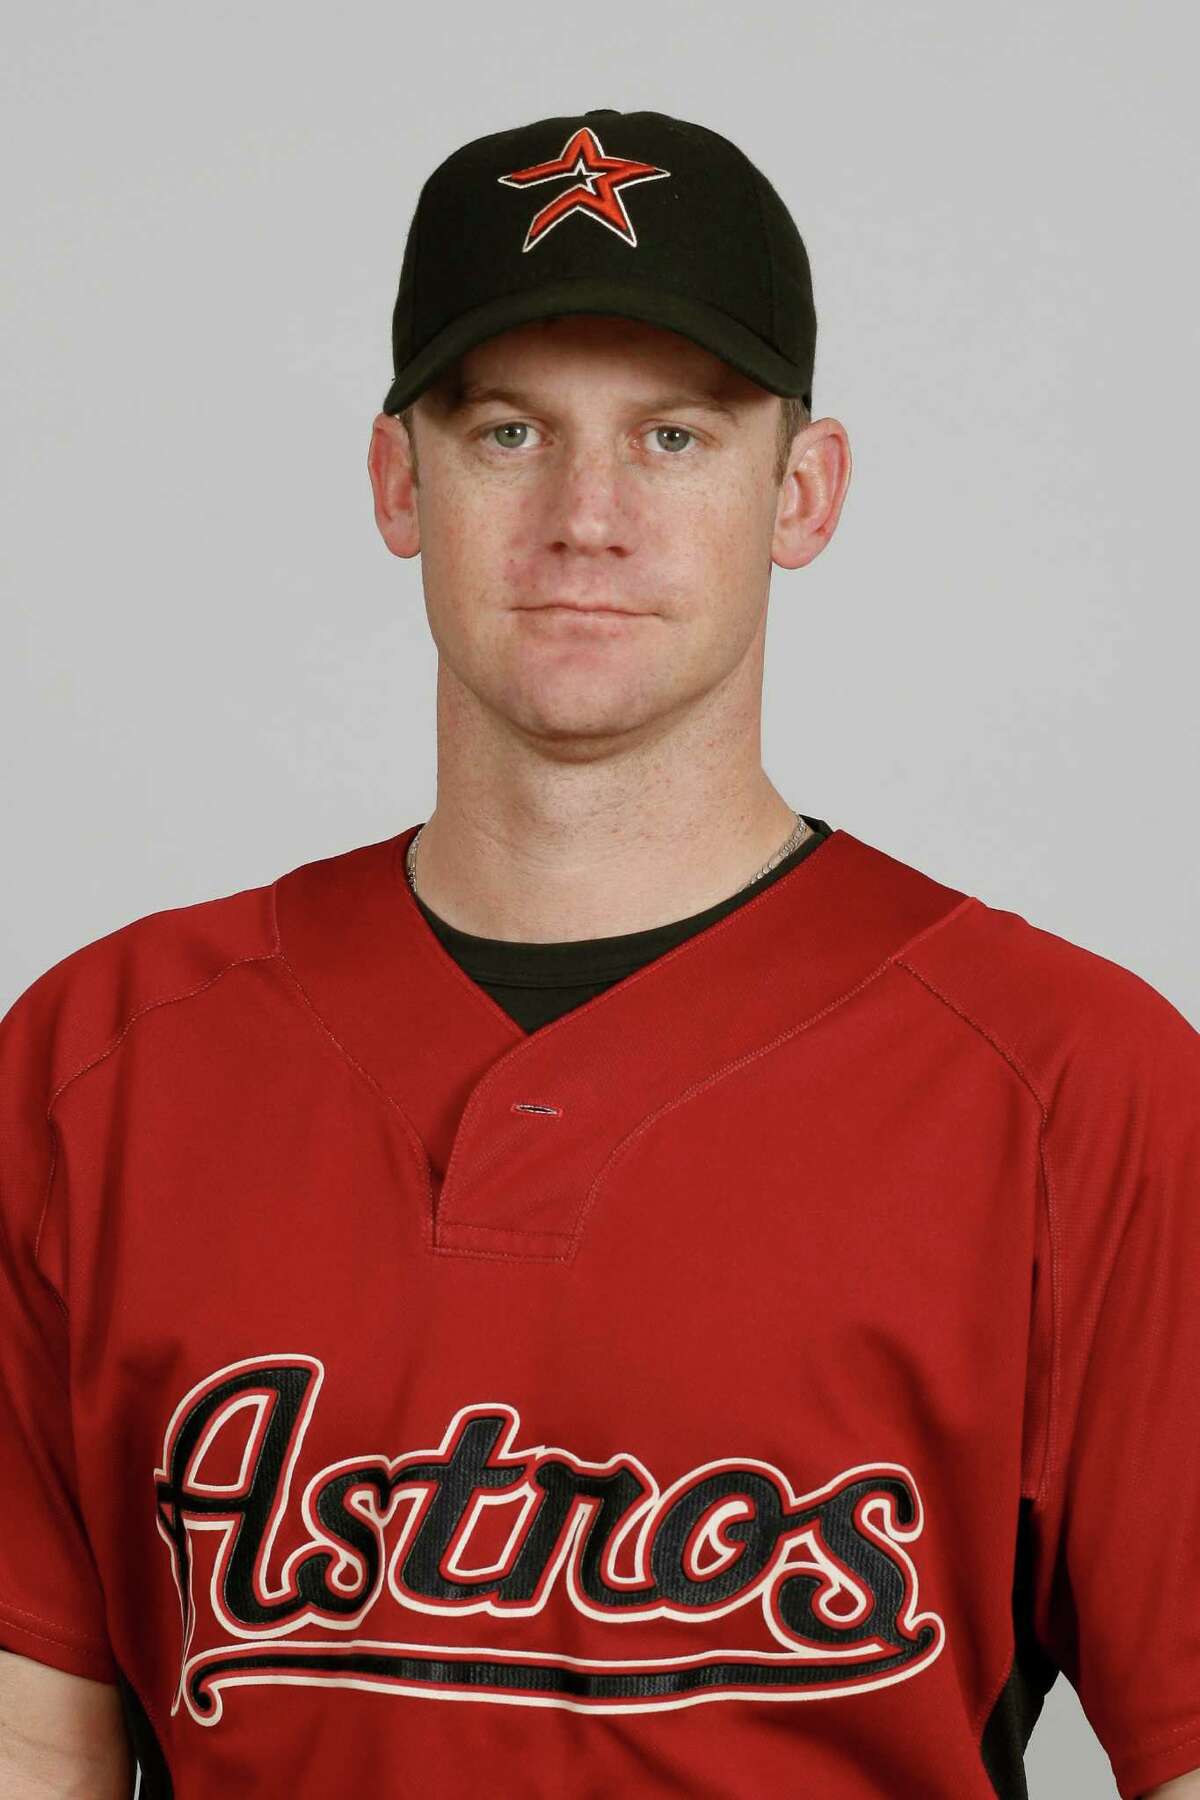 This is a 2010 photo of Roy Oswalt of the Houston Astros baseball team. This image reflects the Houston Astros active roster as of Thursday, Feb. 25, 2010 when this image was taken. (AP Photo/Rob Carr)